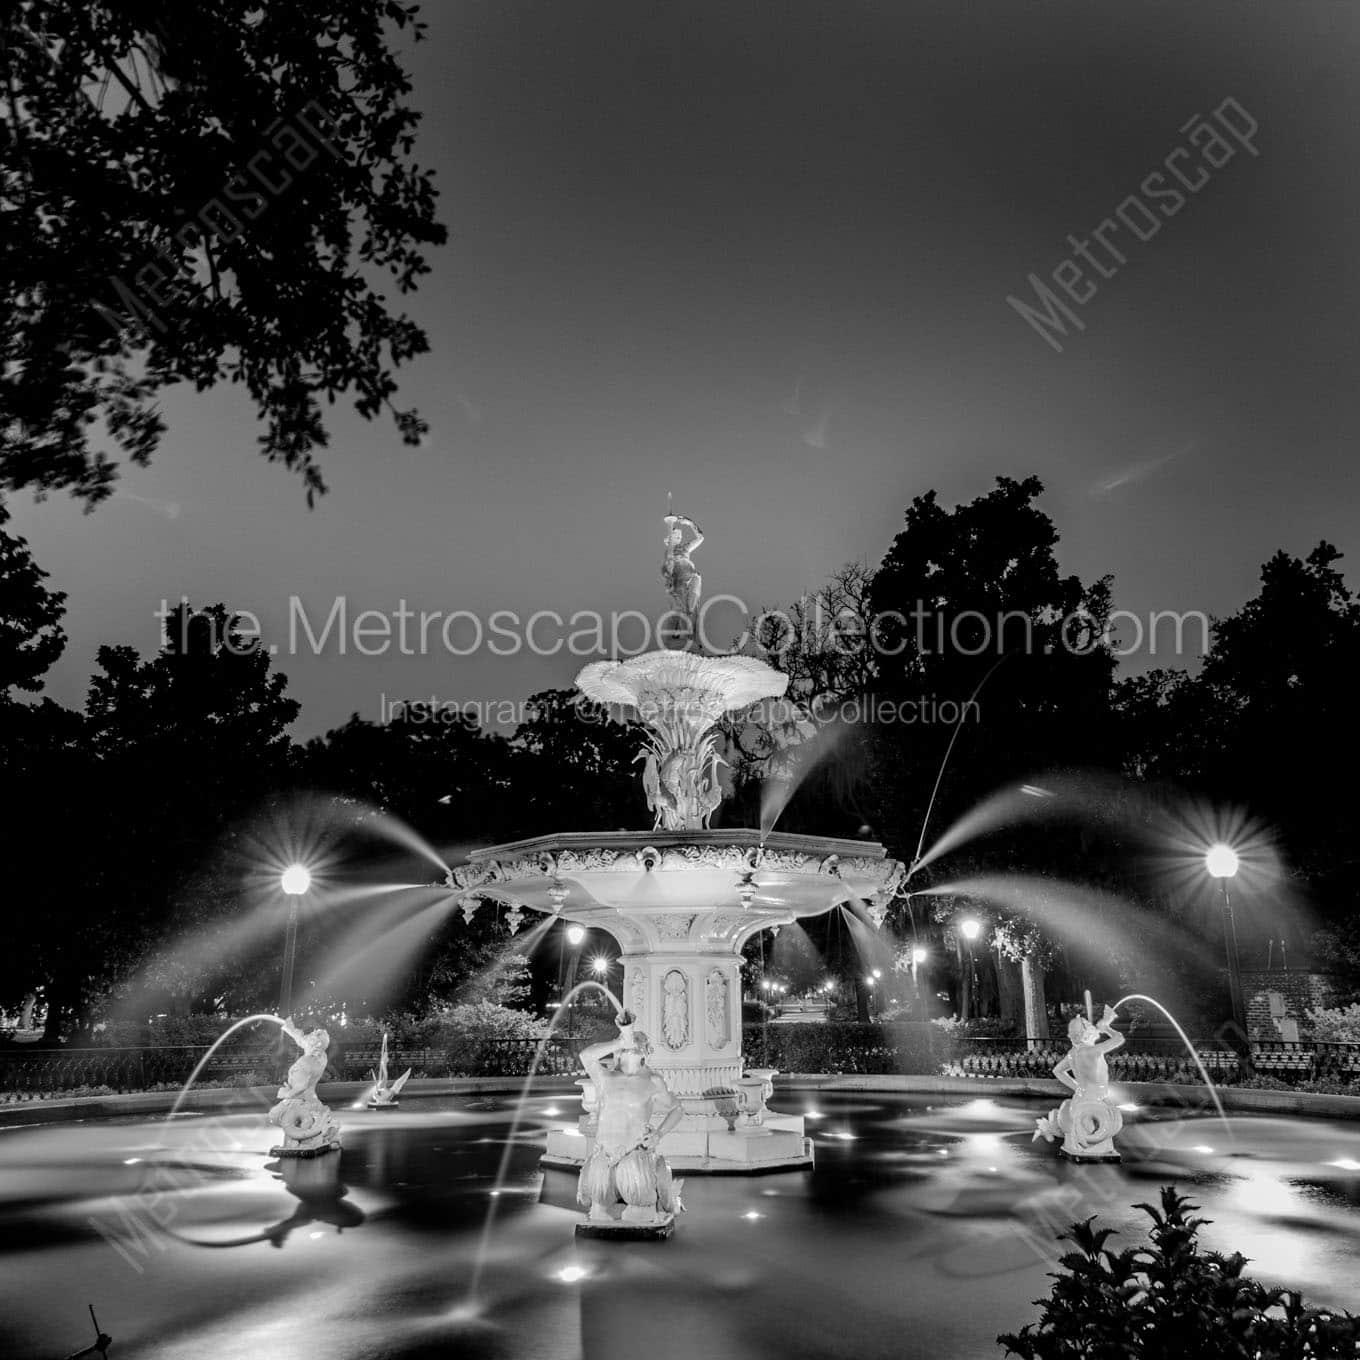 forsyth fountain at night Black & White Wall Art